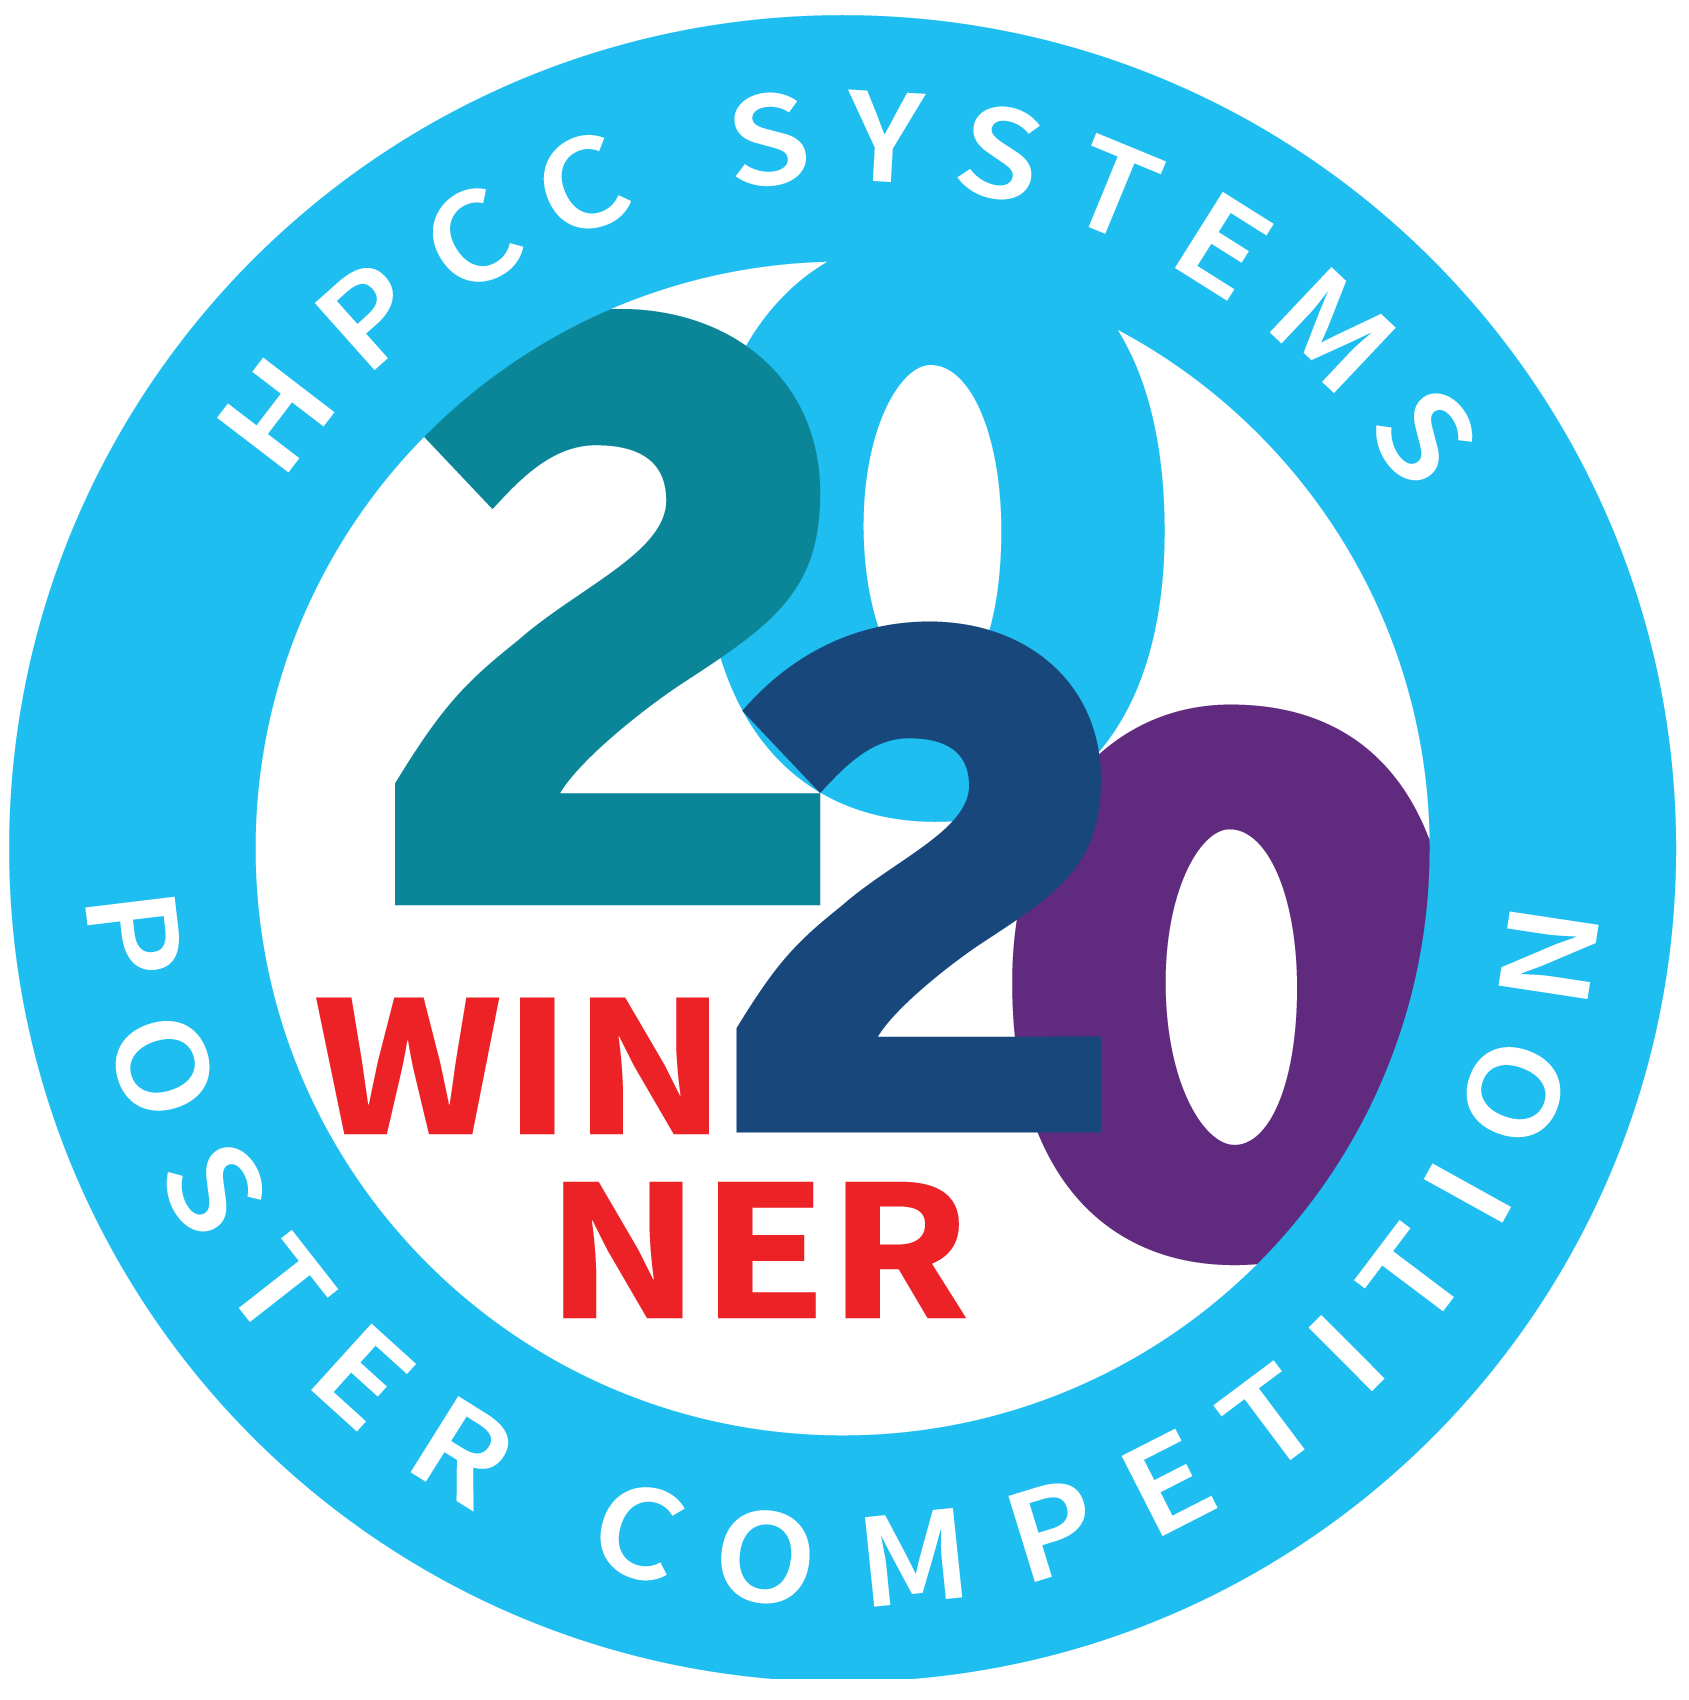 Image showing the 2020 Poster Competition Winner Badge